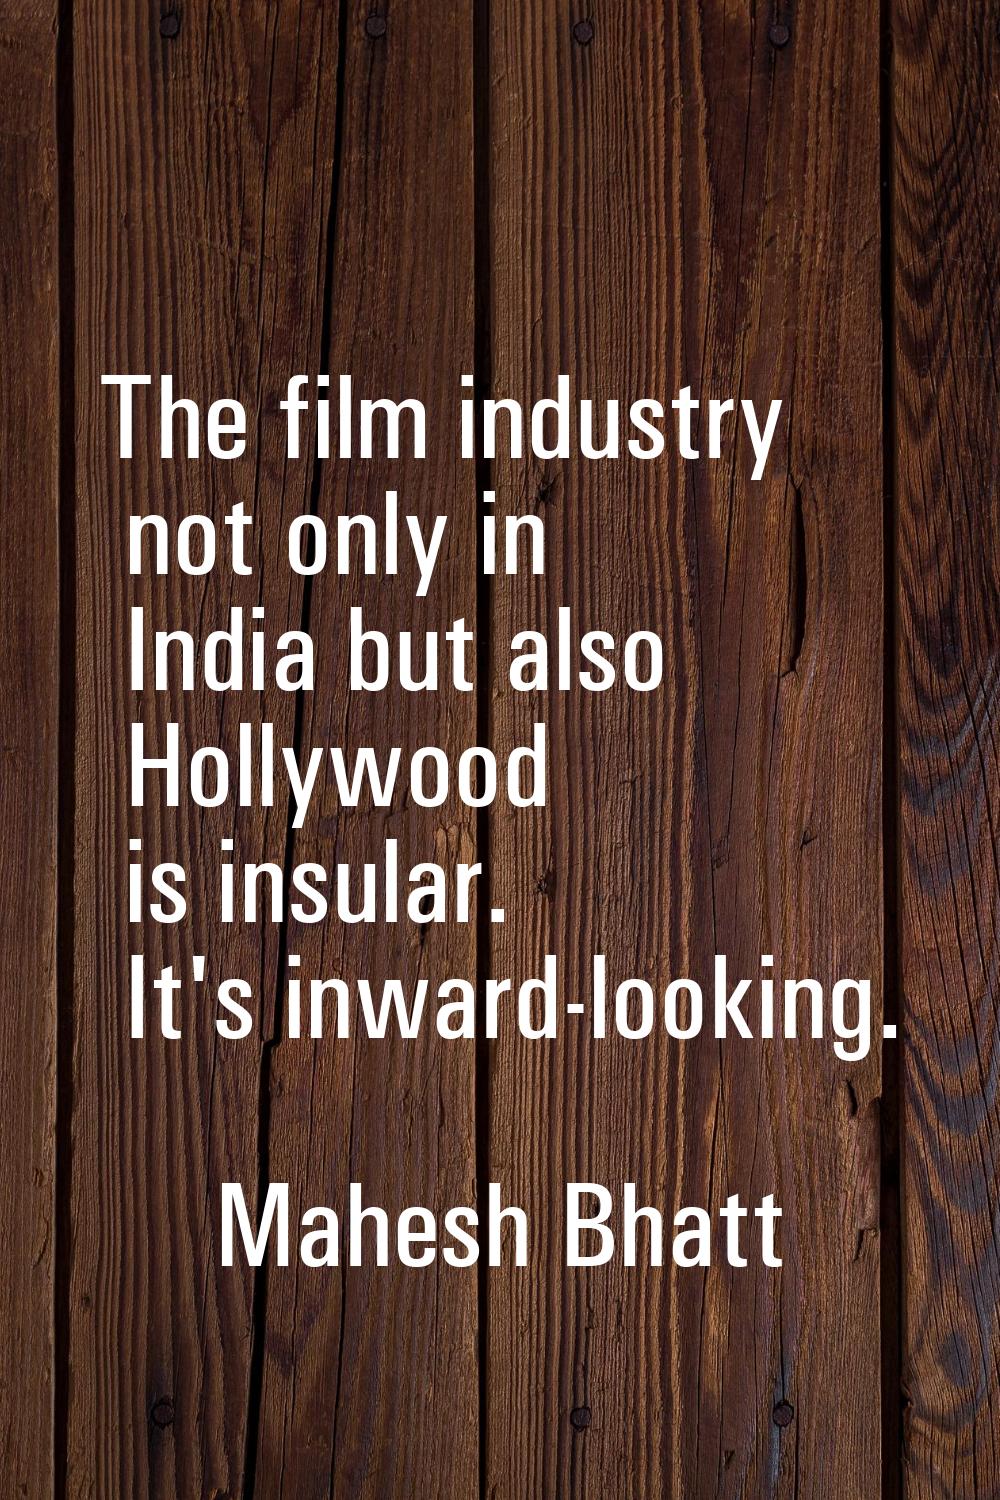 The film industry not only in India but also Hollywood is insular. It's inward-looking.